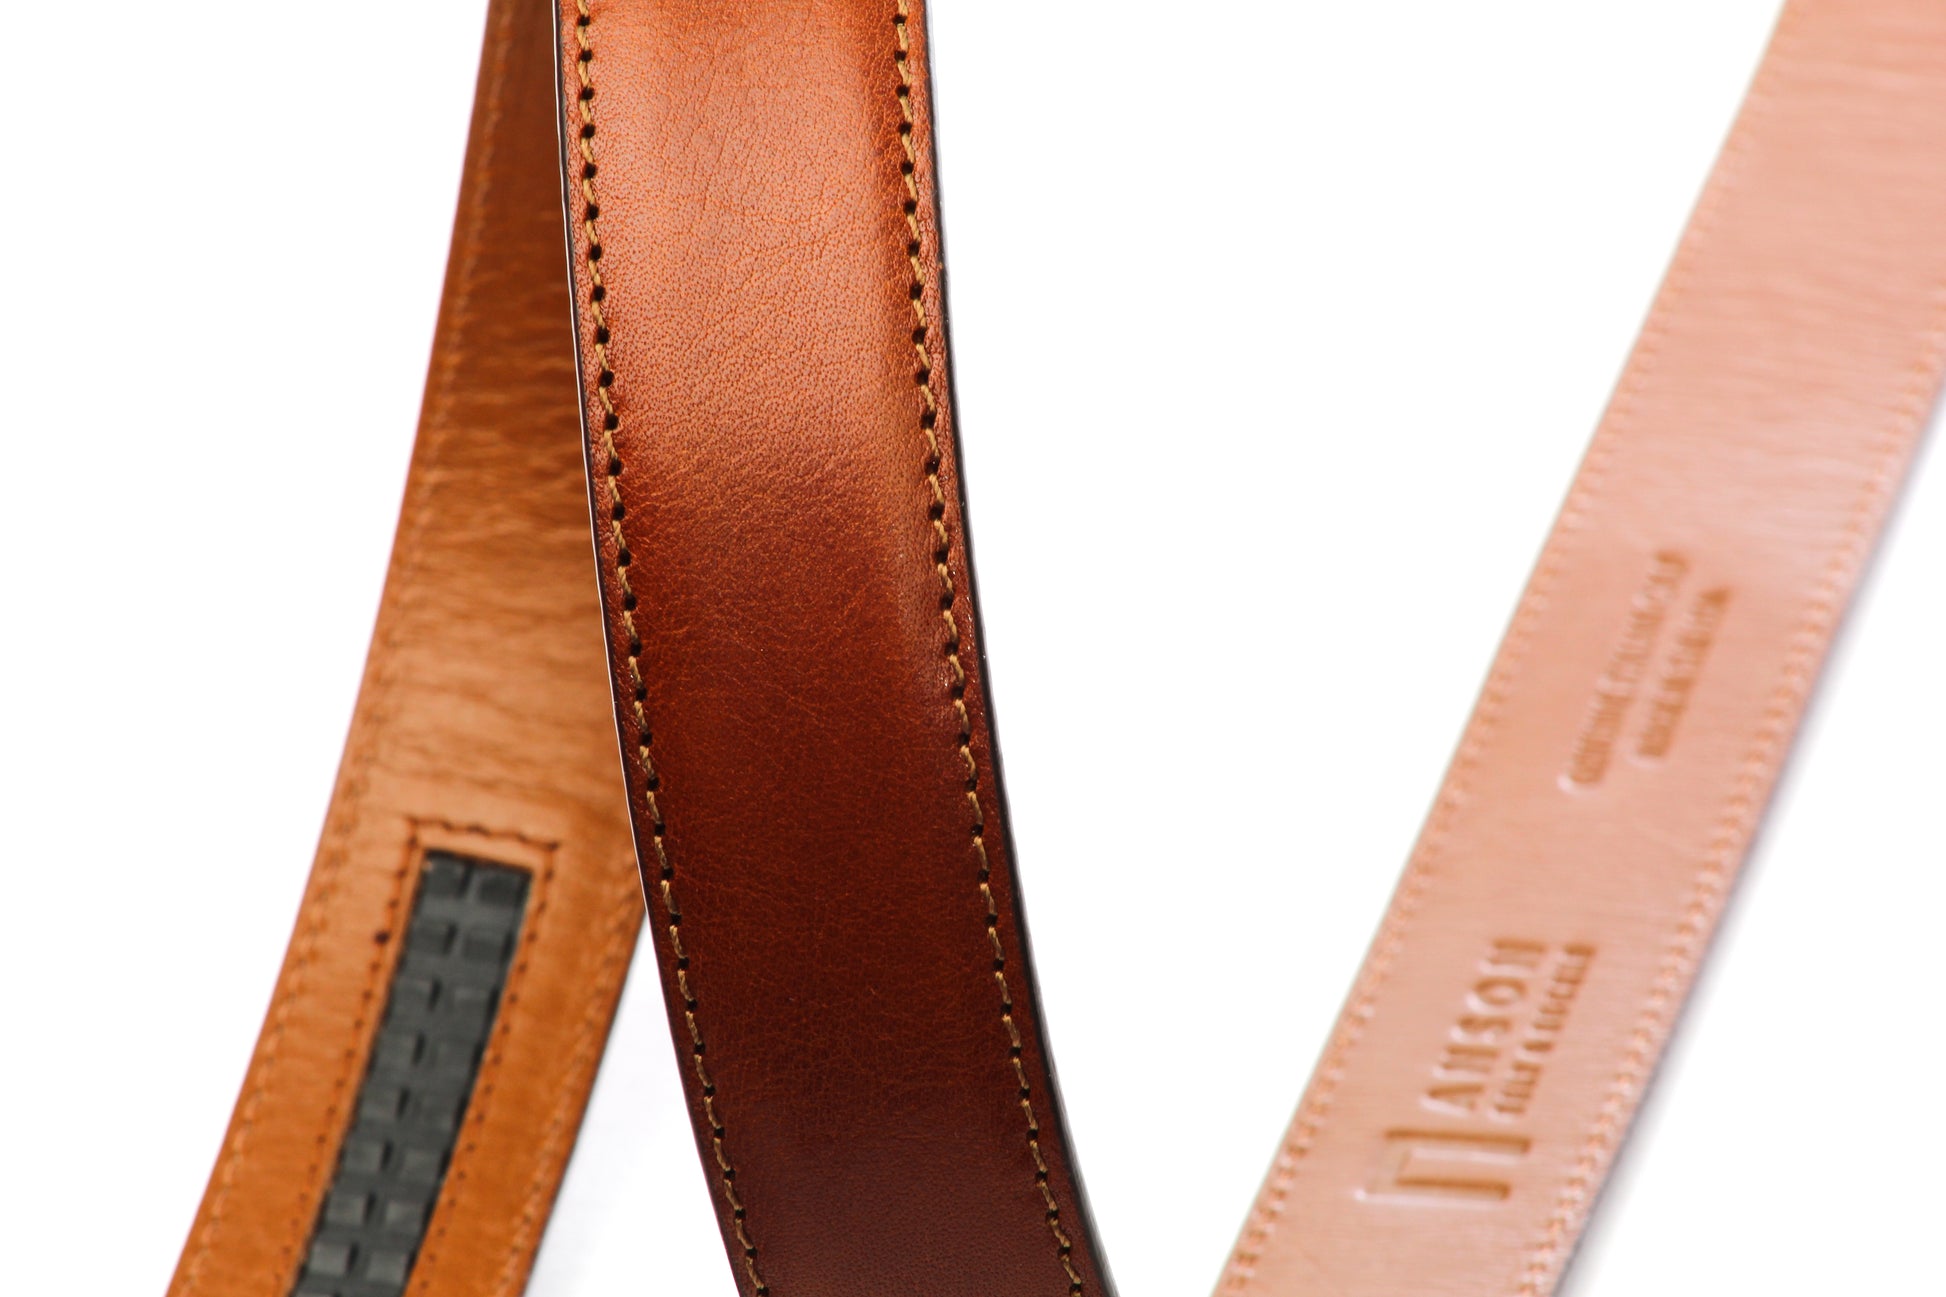 Men's Italian calfskin belt strap in cognac with a 1.25-inch width, formal look, stitching close up